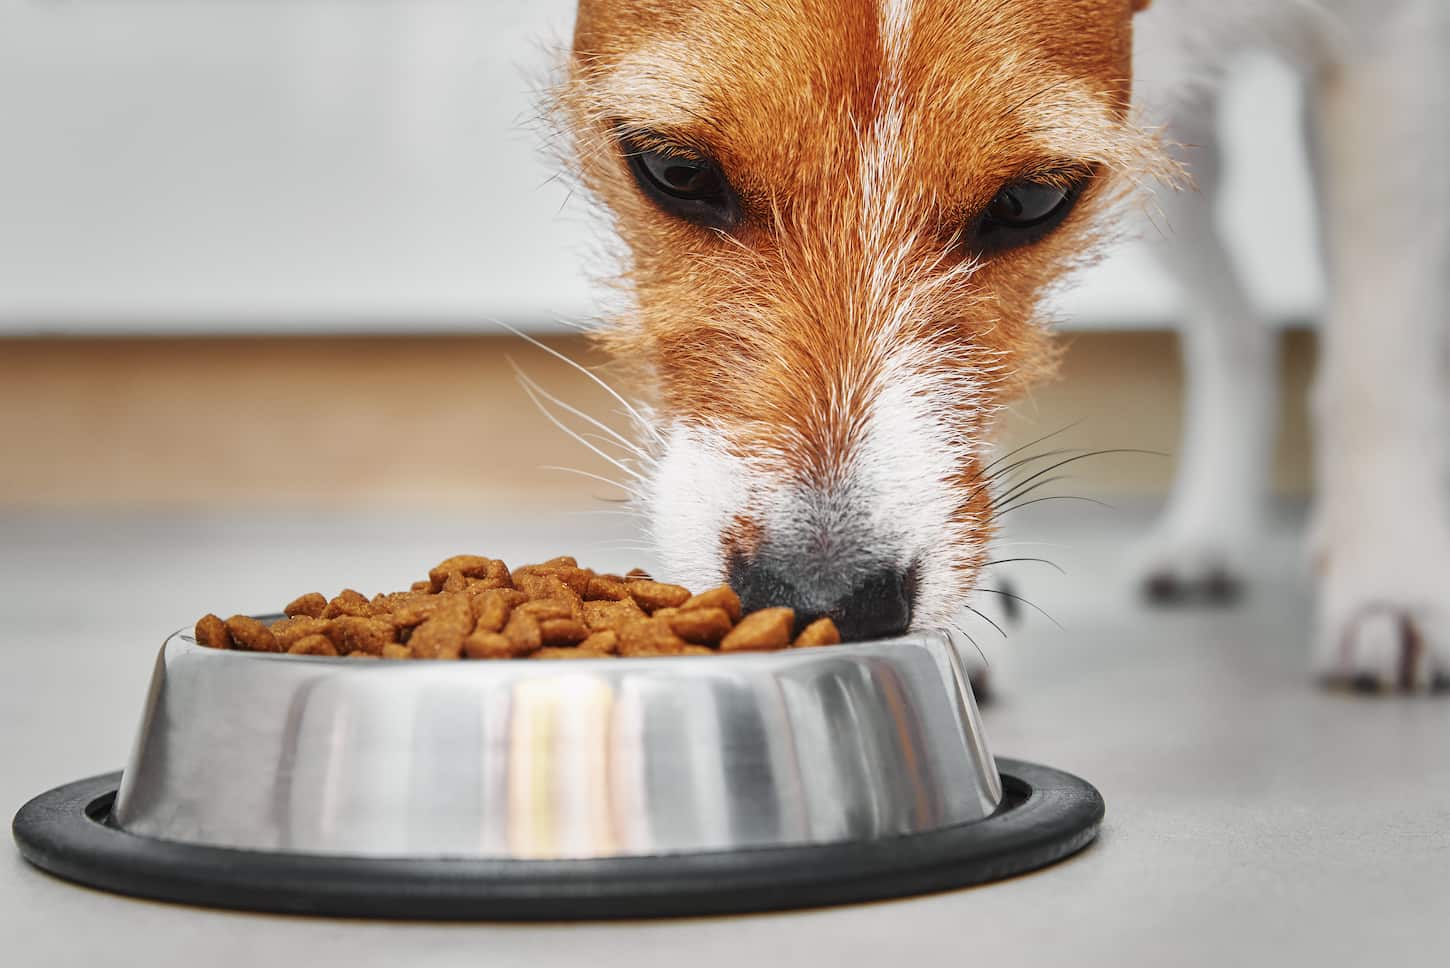 An image of a Dog eating dry feed from a food bowl.